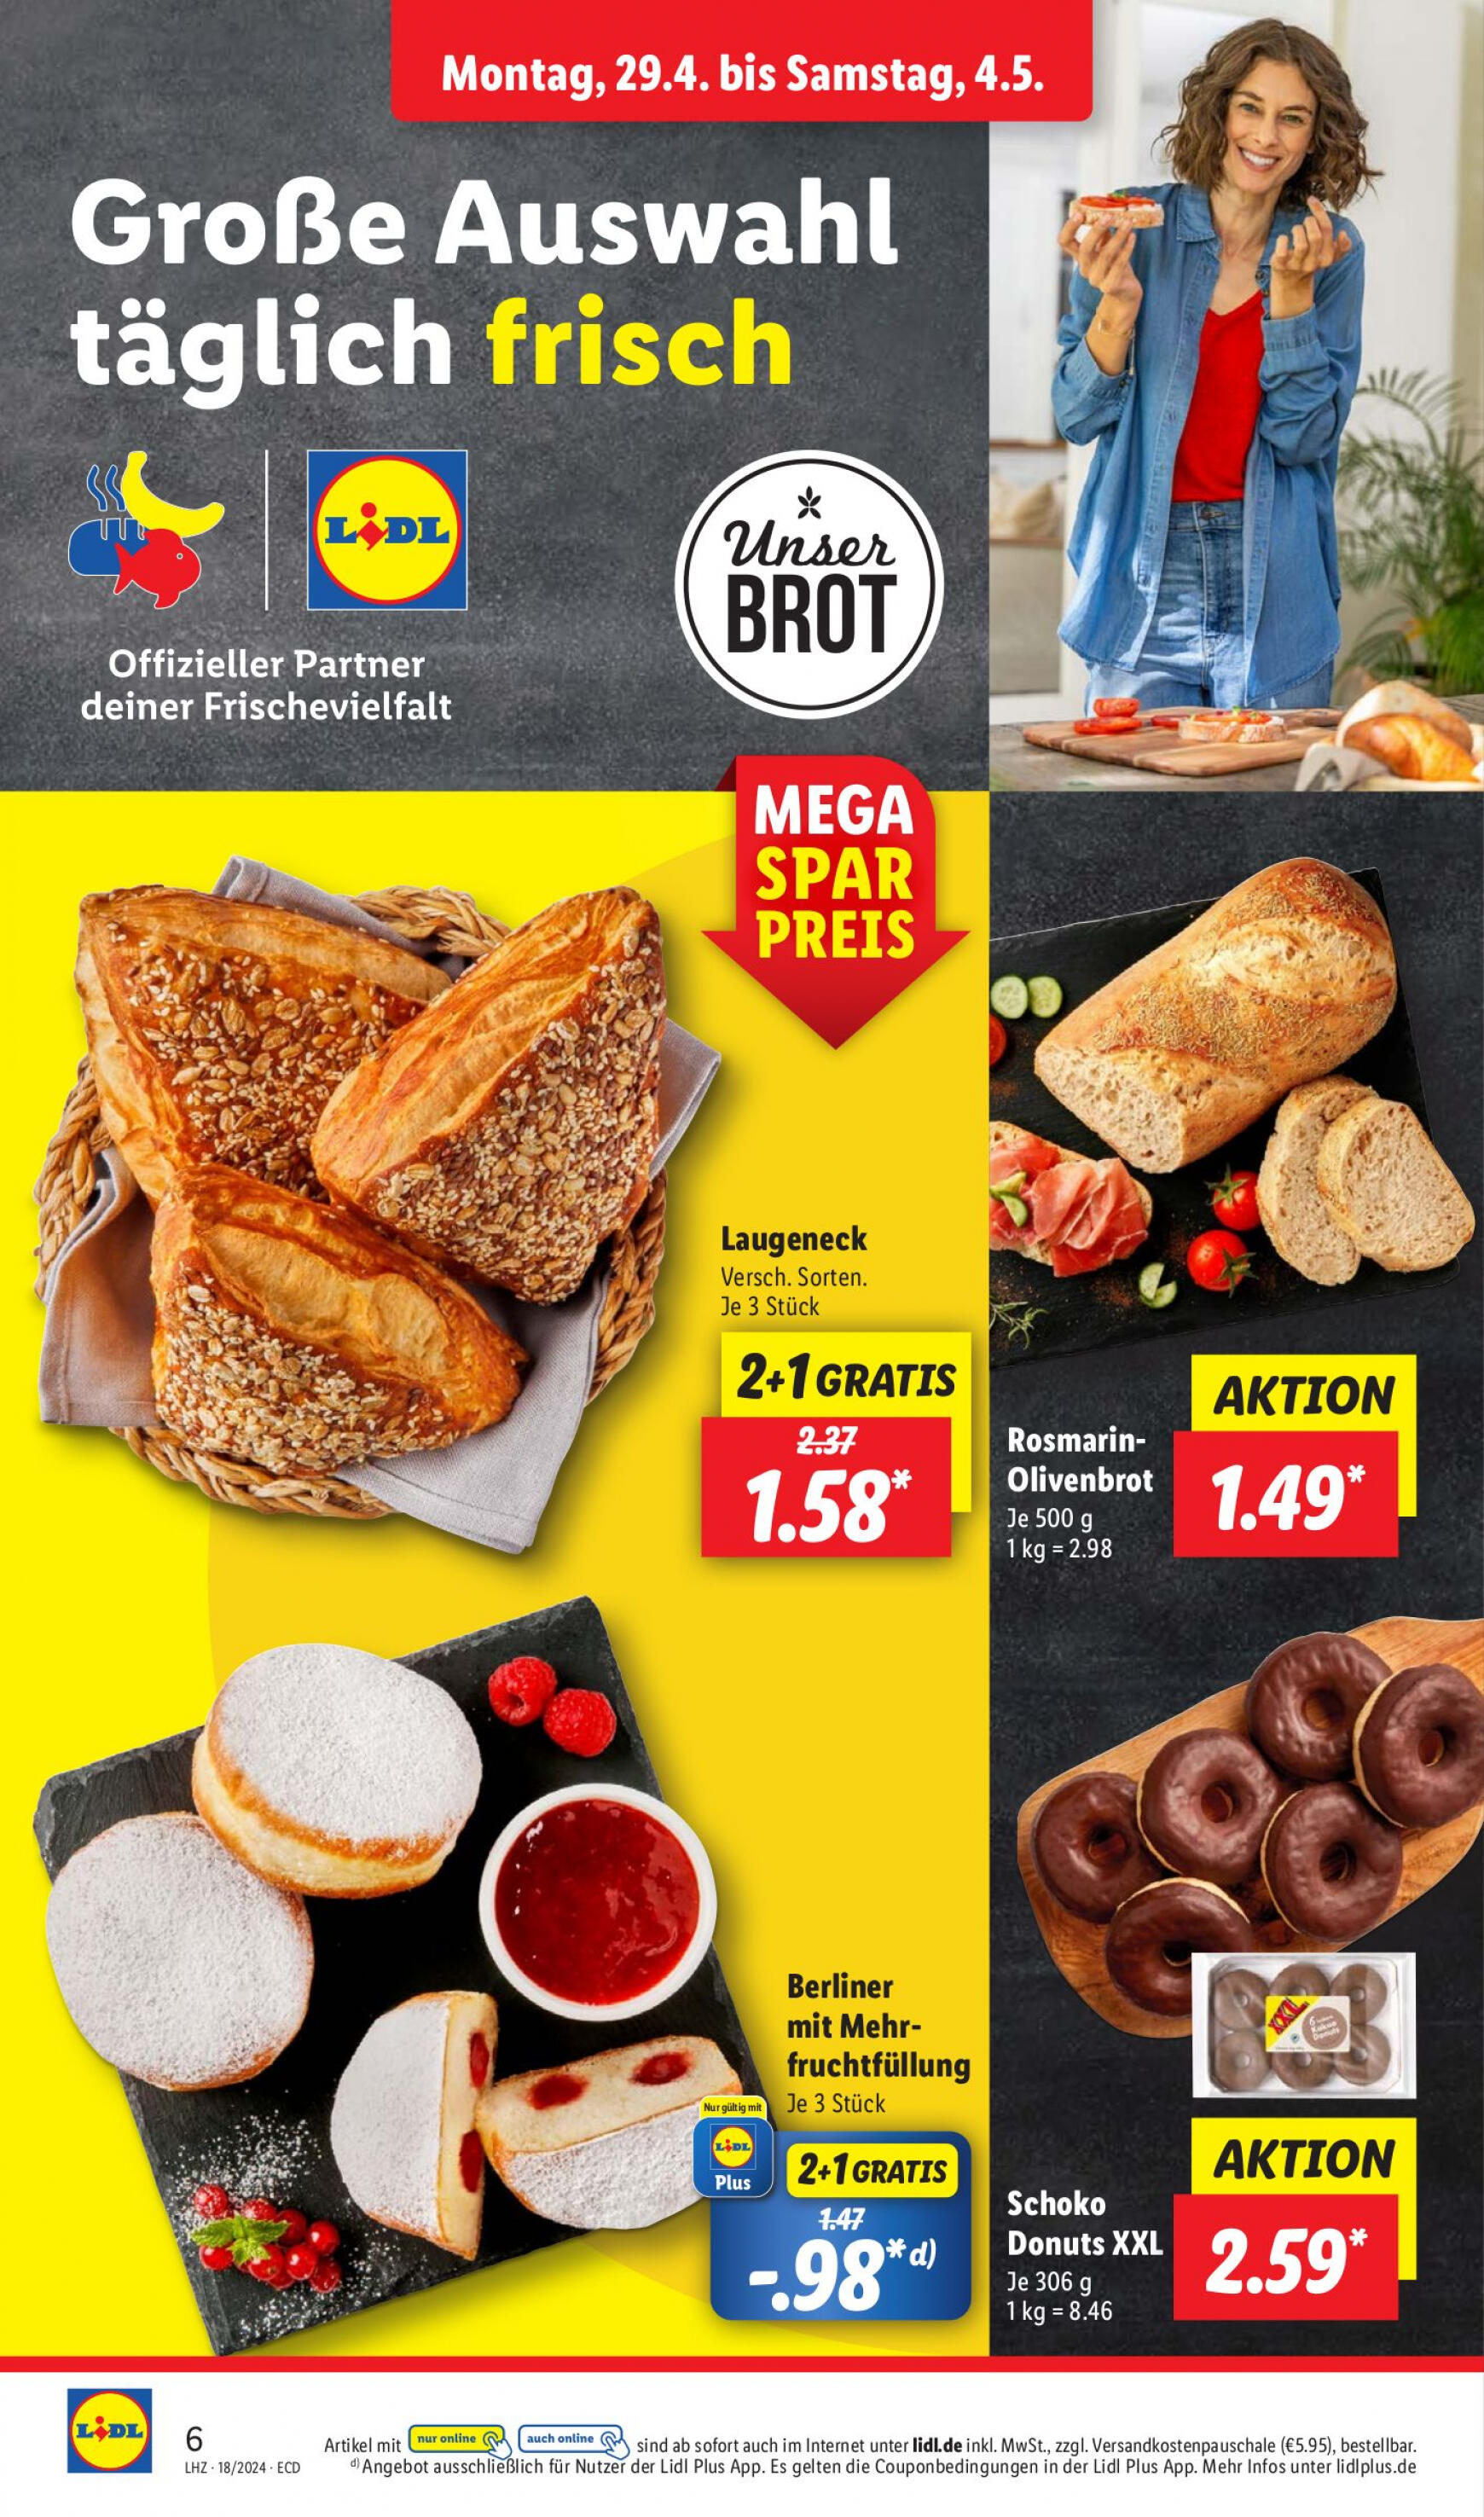 lidl - Flyer Lidl aktuell 29.04. - 04.05. - page: 6